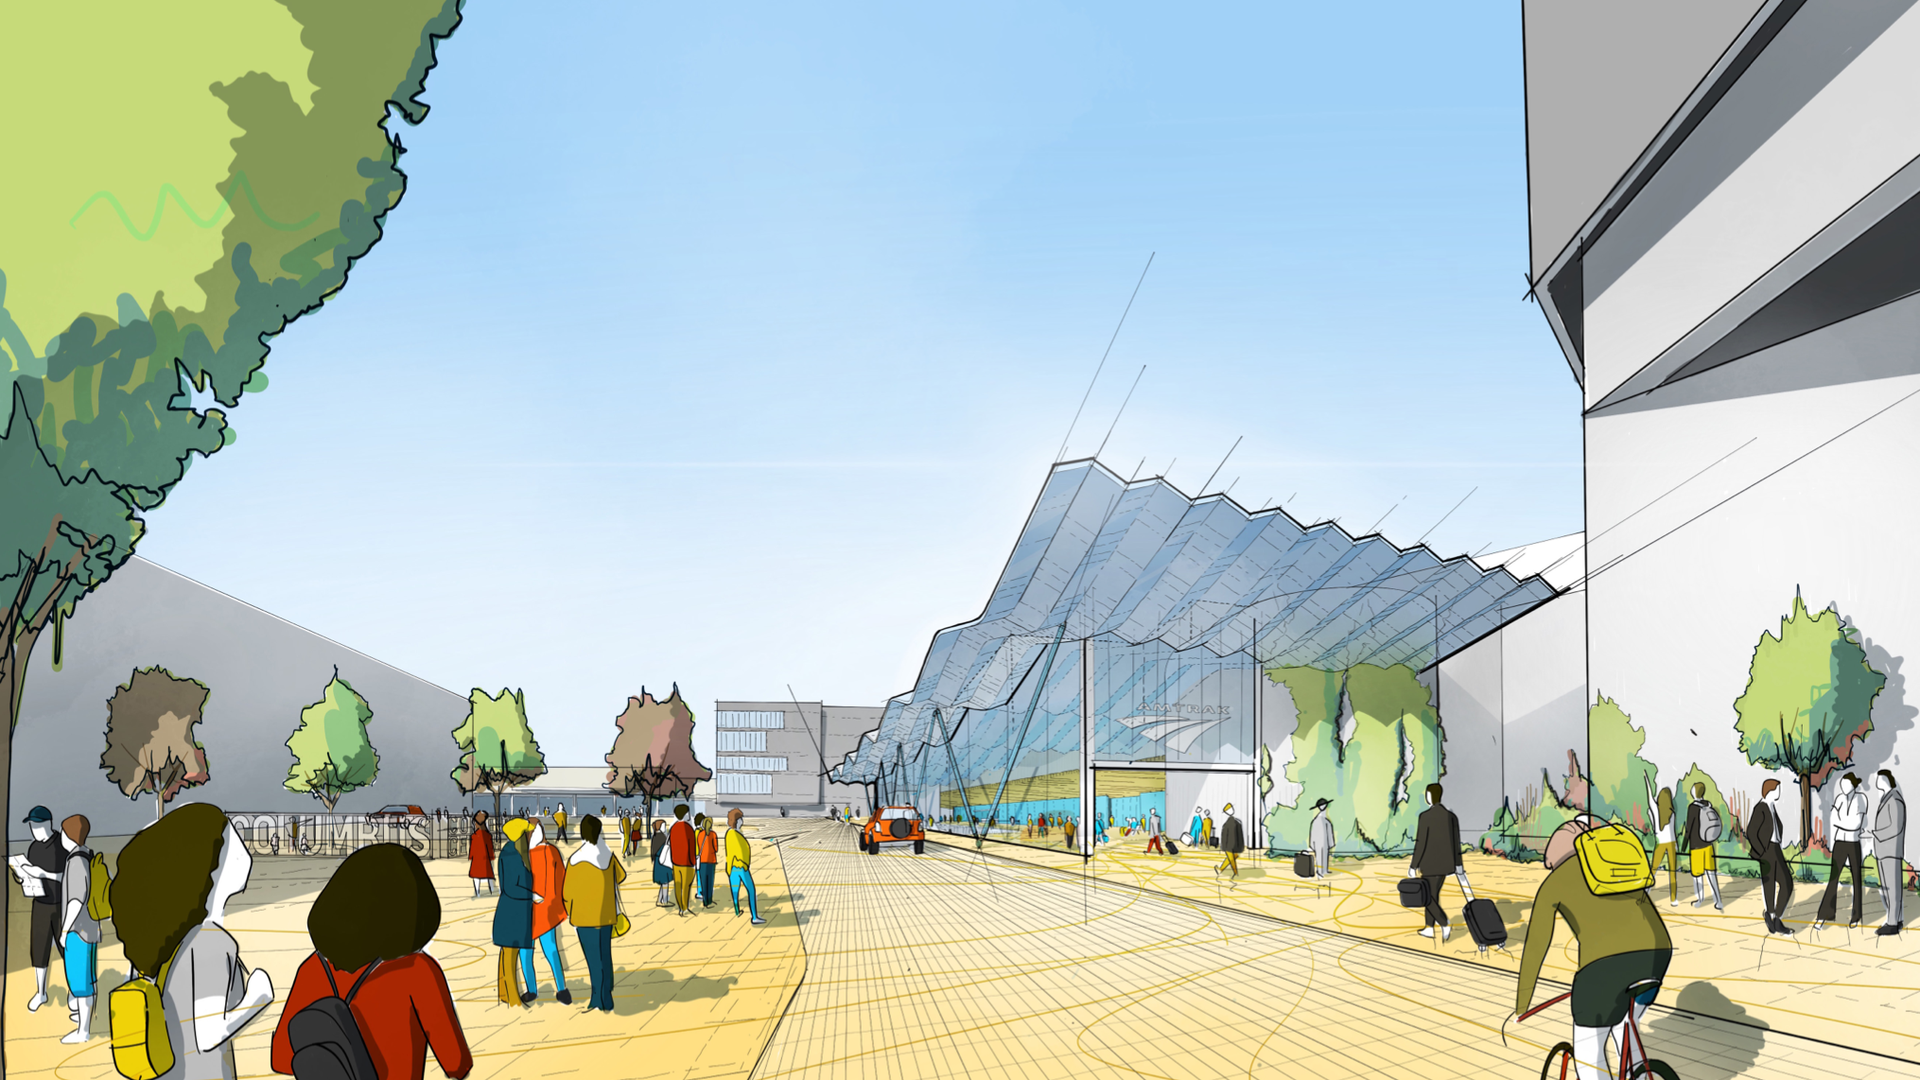 An architect's rendering of the entrance to a proposed Columbus Amtrak station, in color